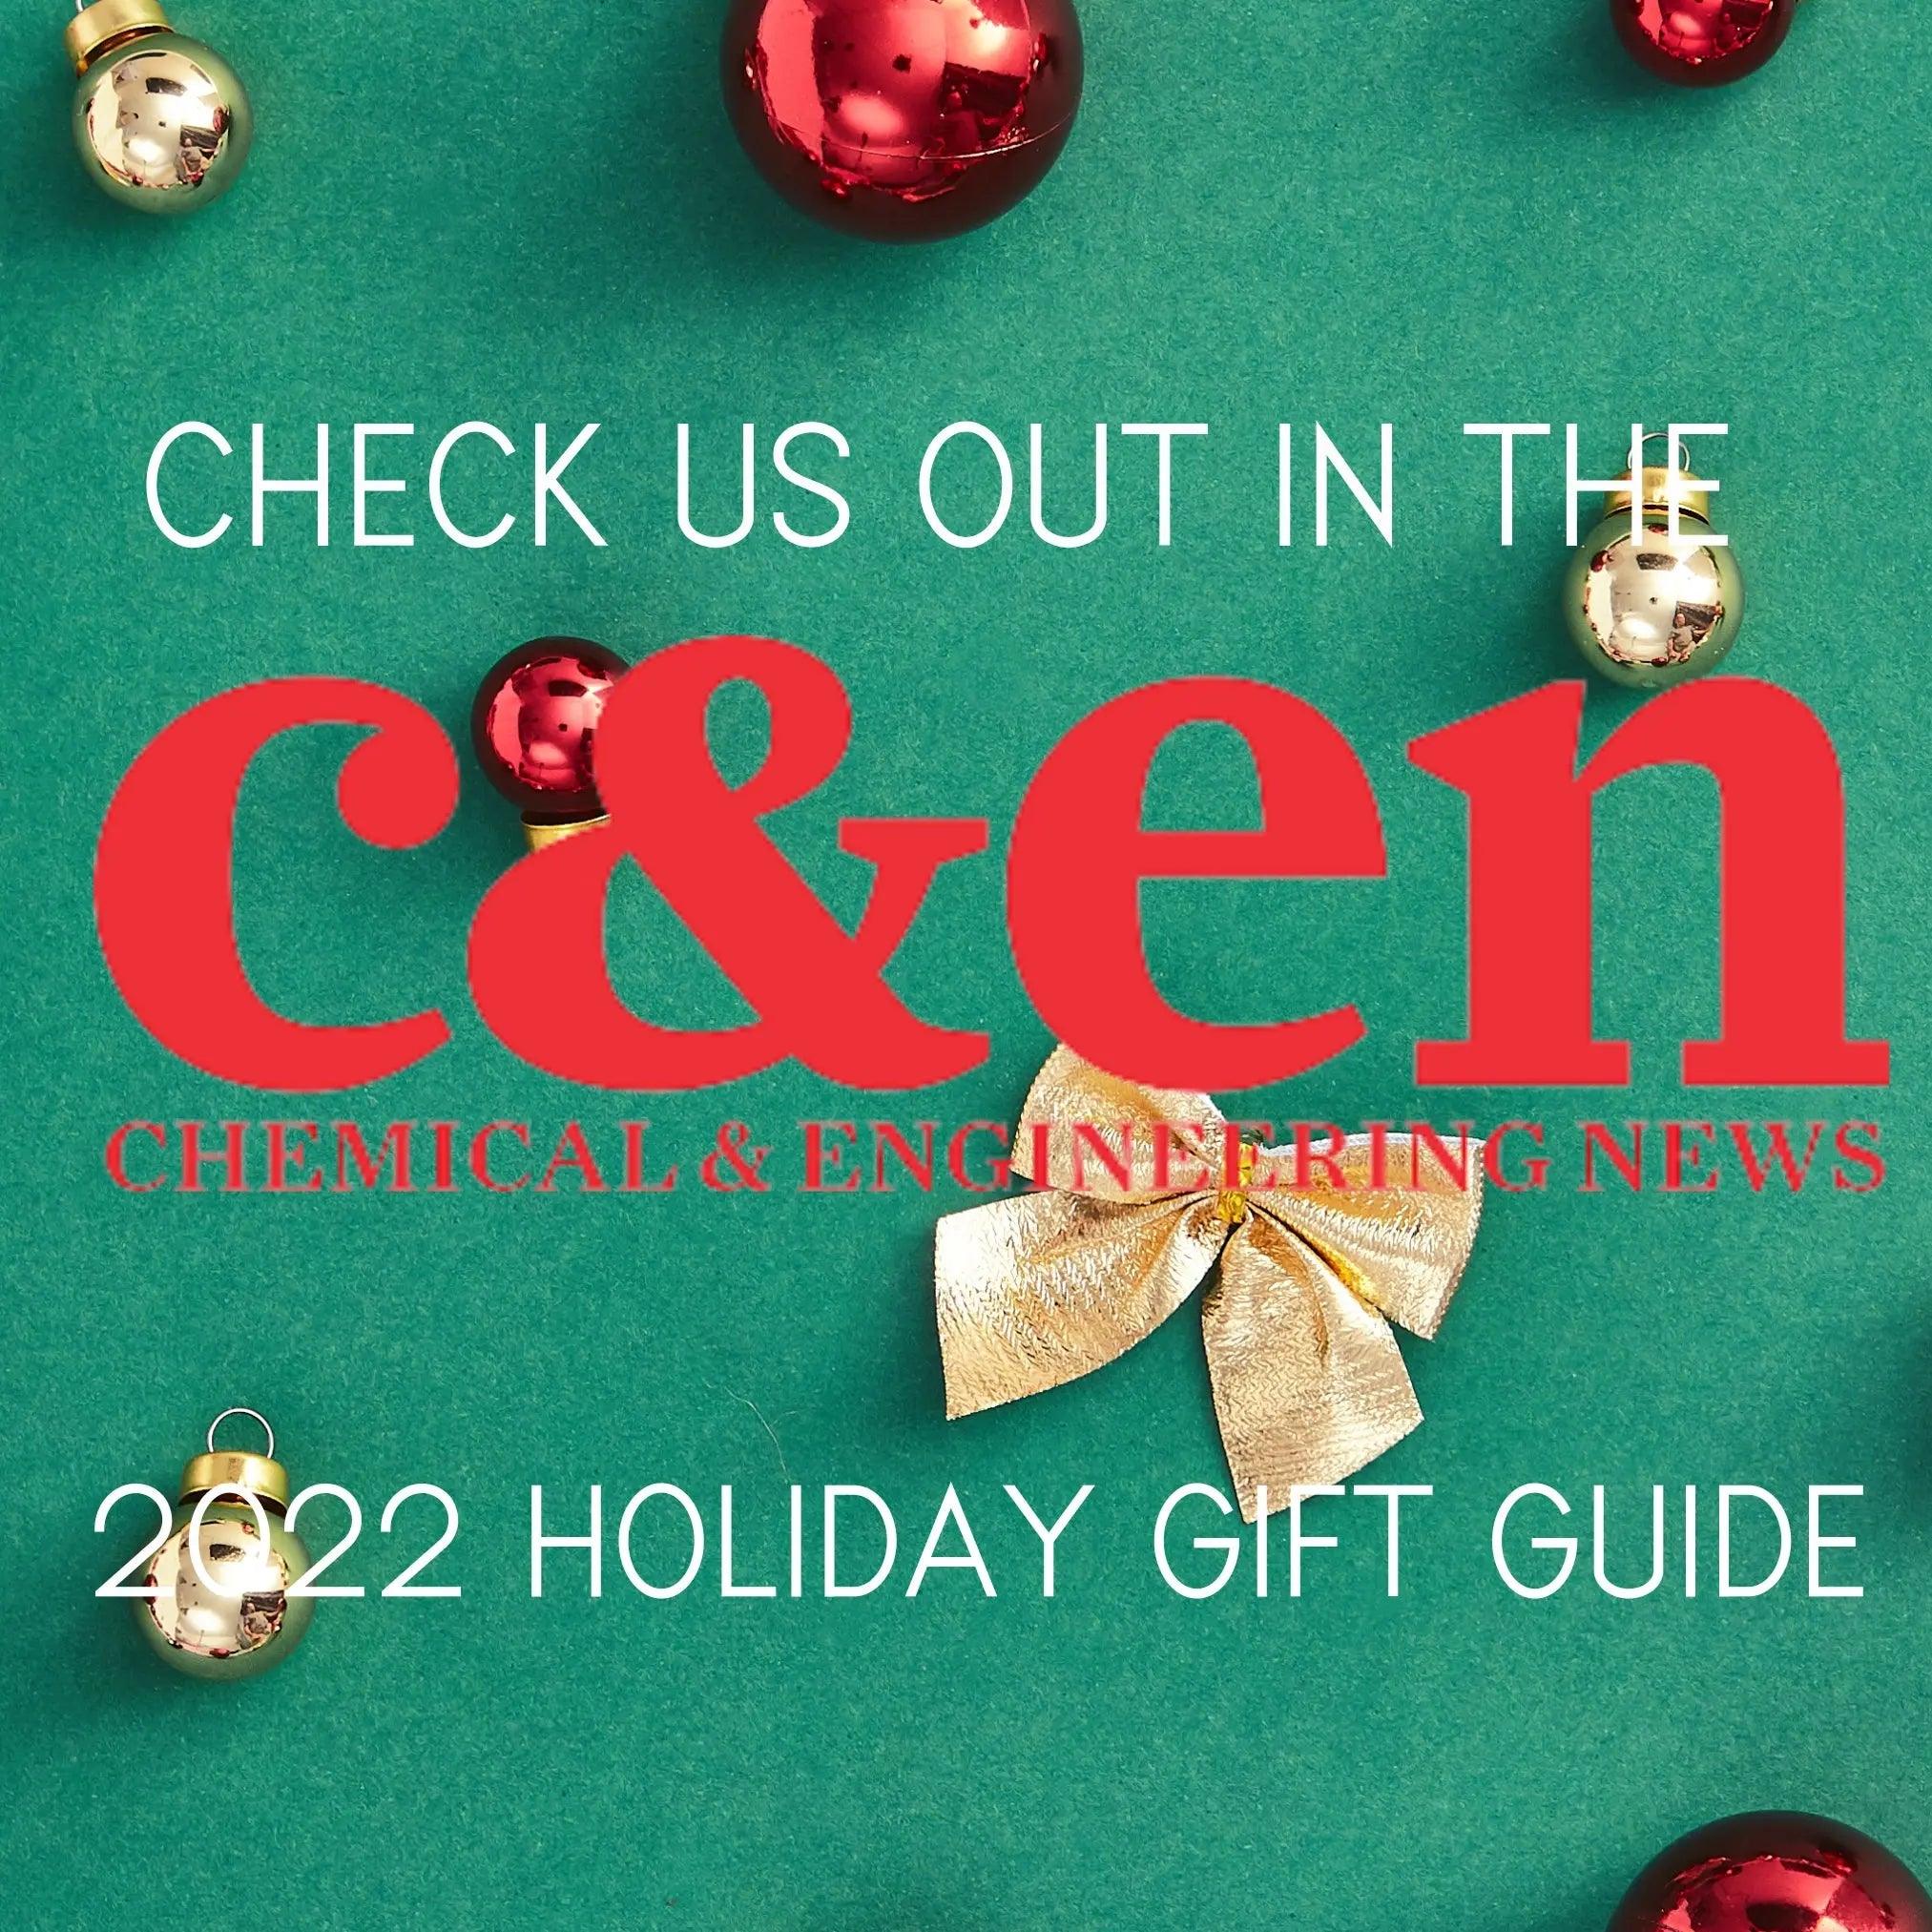 Check Out C&EN's 2022 Holiday Gift Guide for Chemists and Engineers! thecalculatedchemist